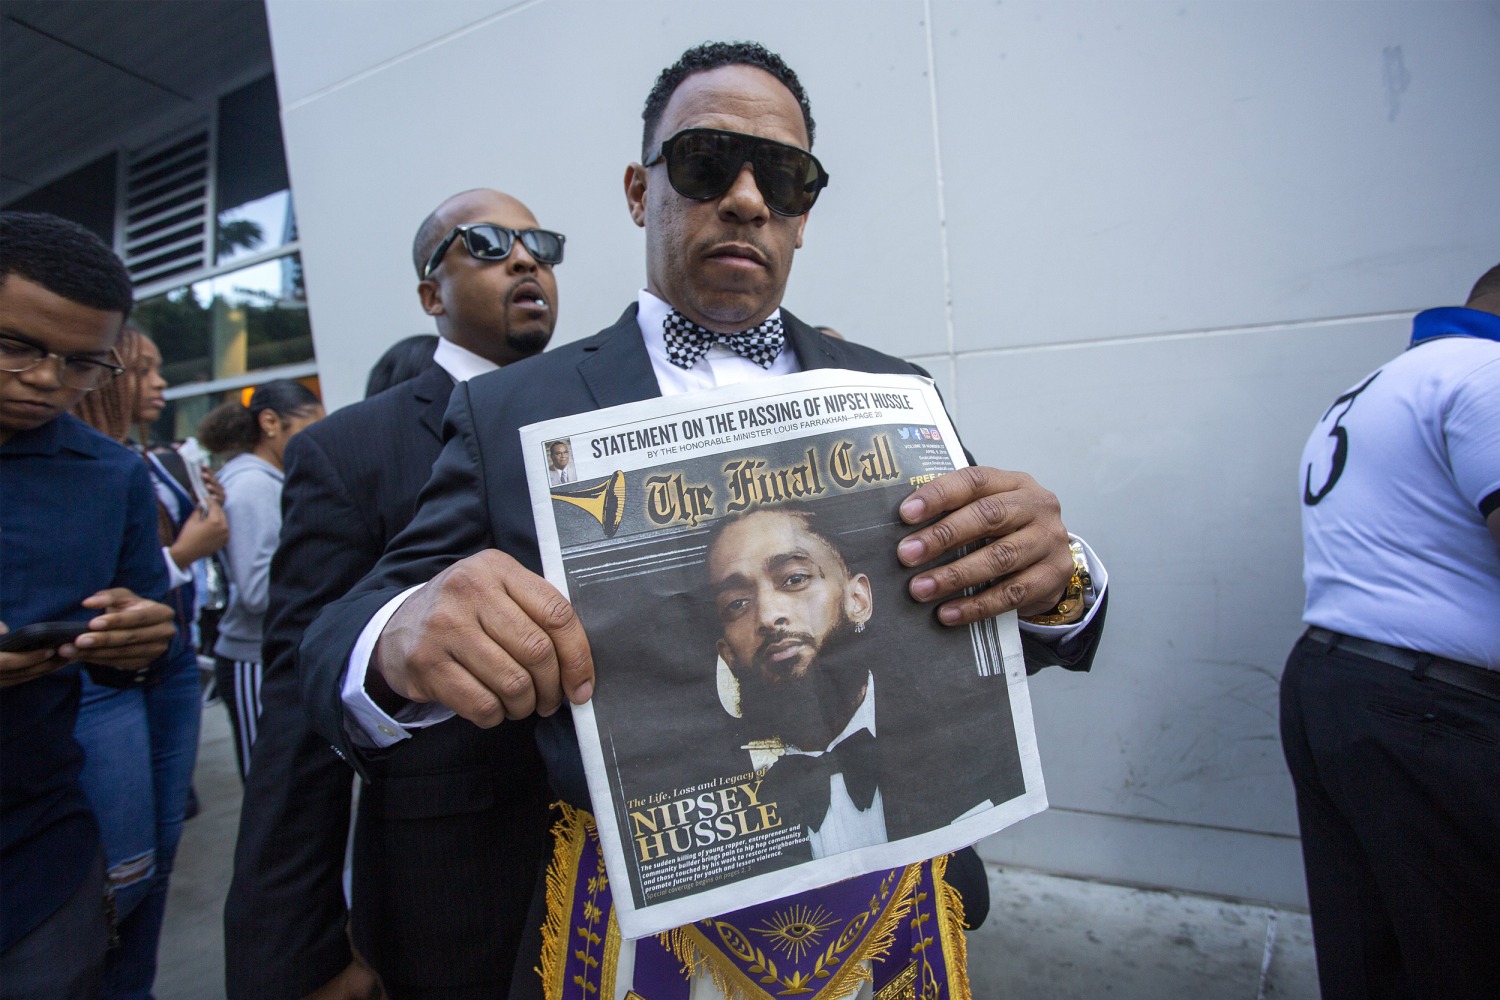 Thousands from across the country mourn at Nipsey Hussle's LA